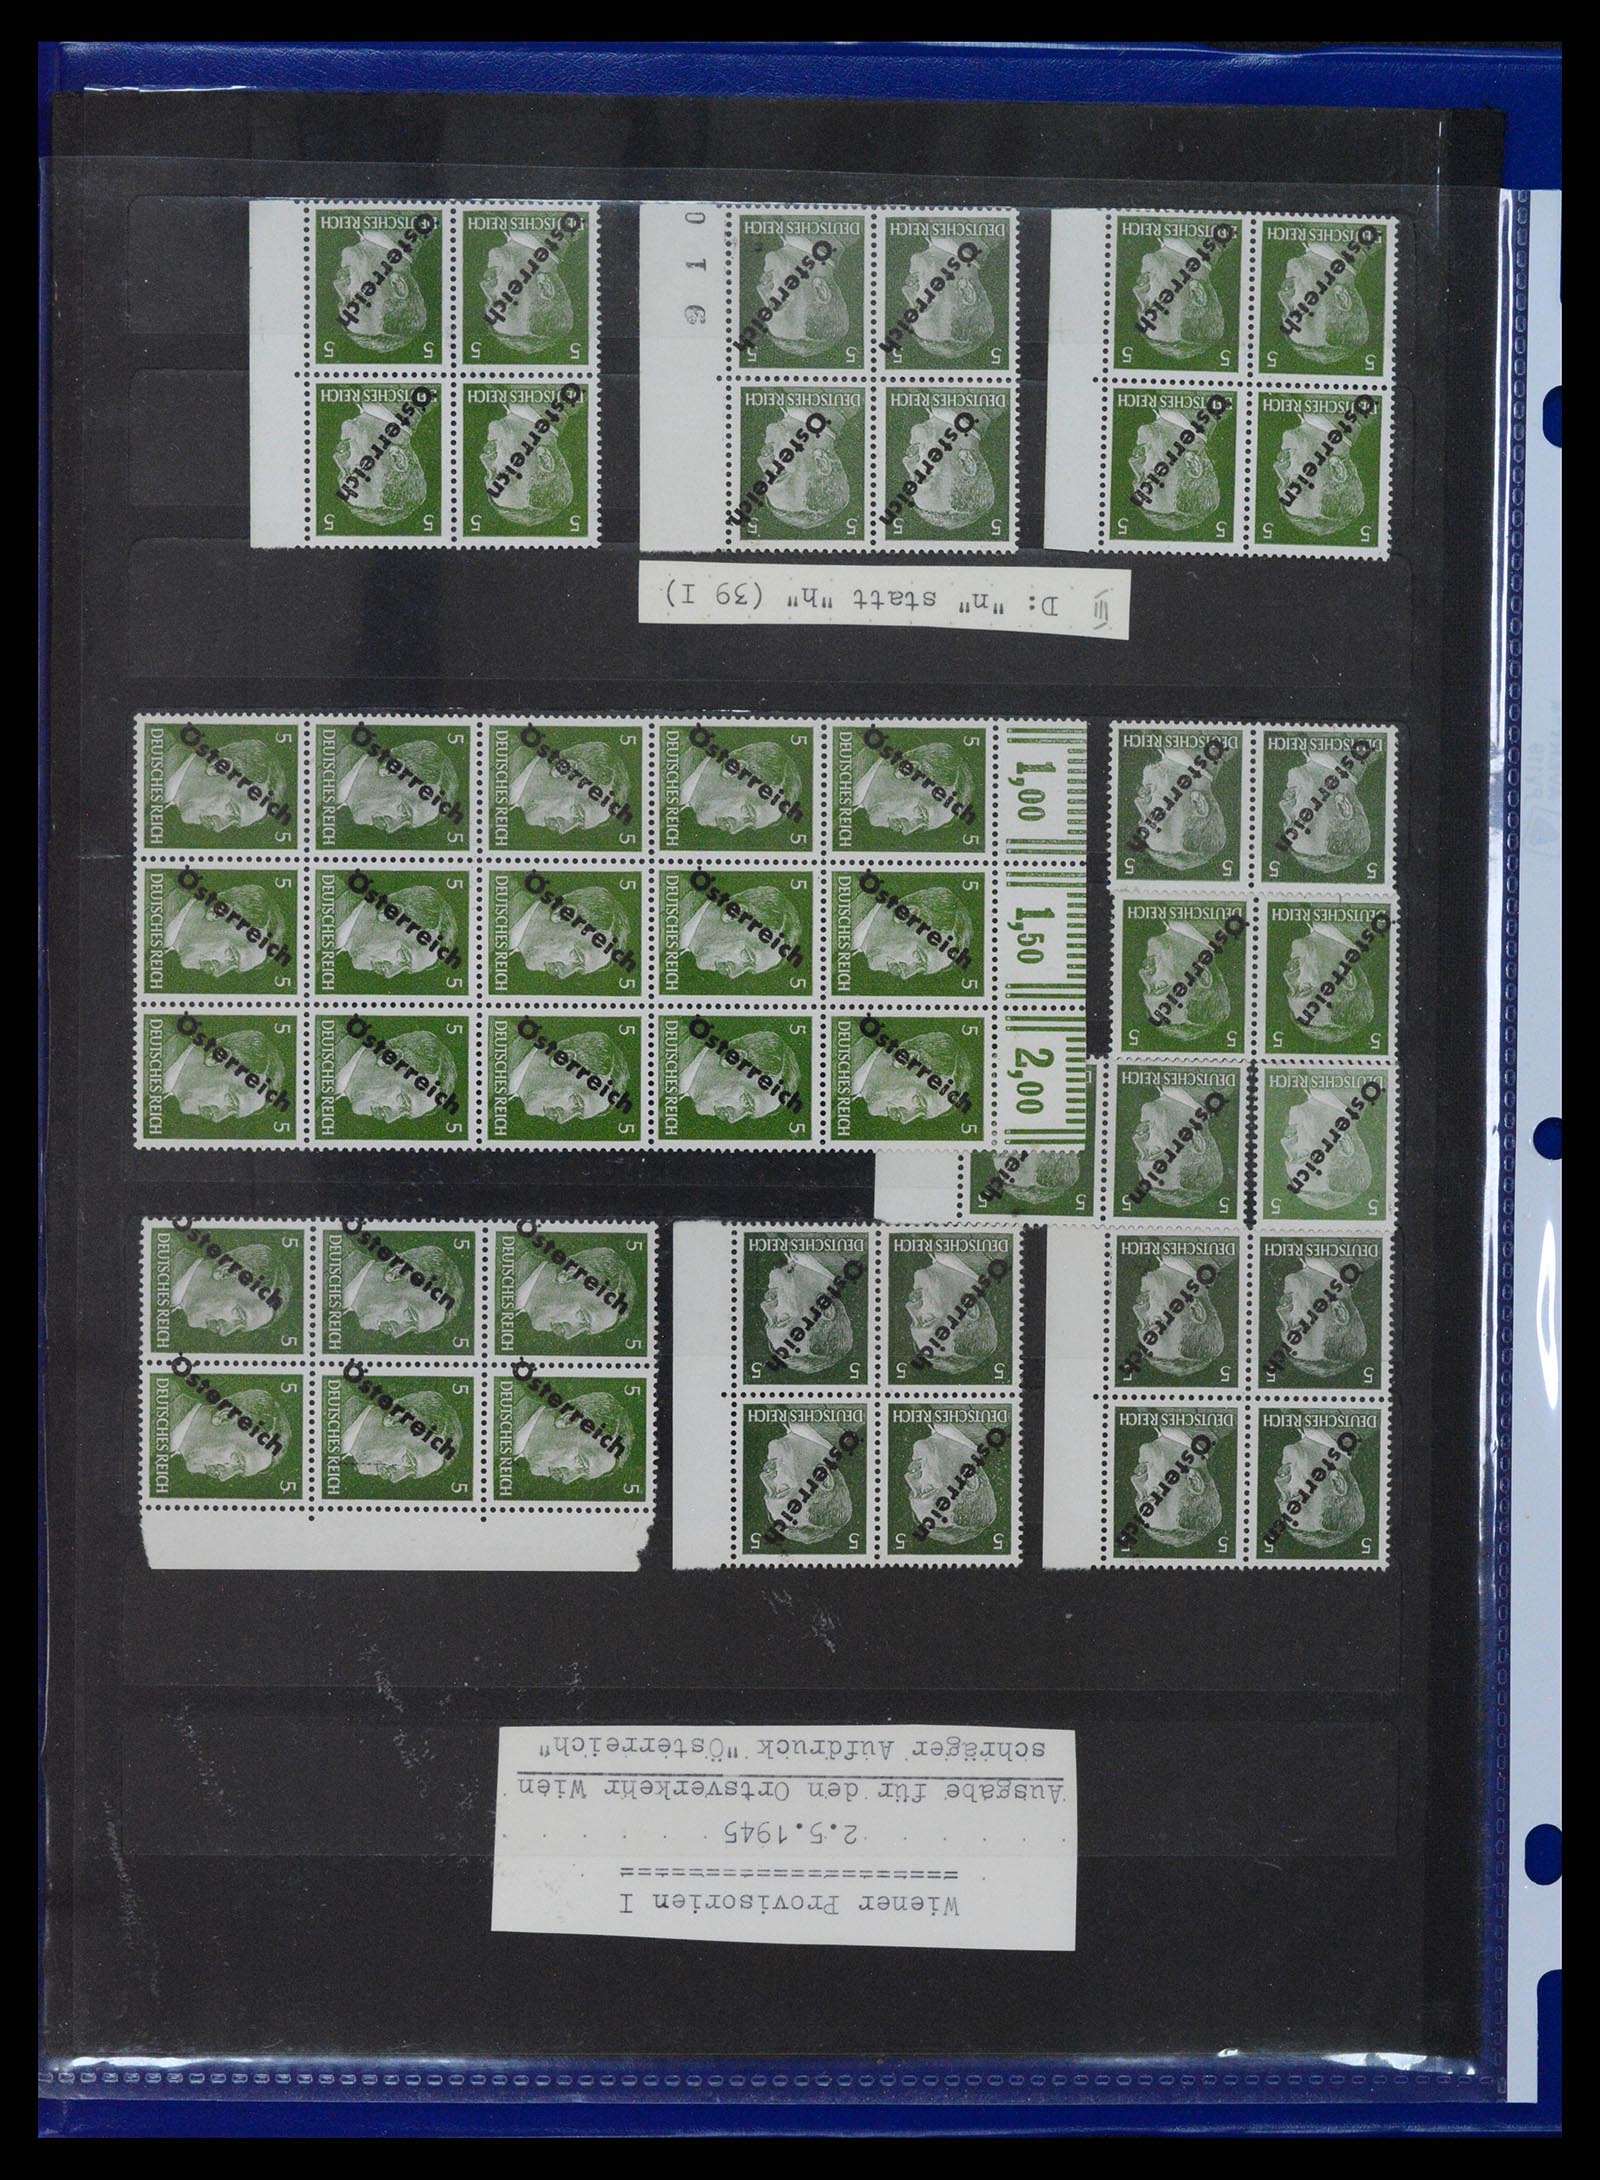 37390 035 - Stamp collection 37390 Austria local overprints 1945.